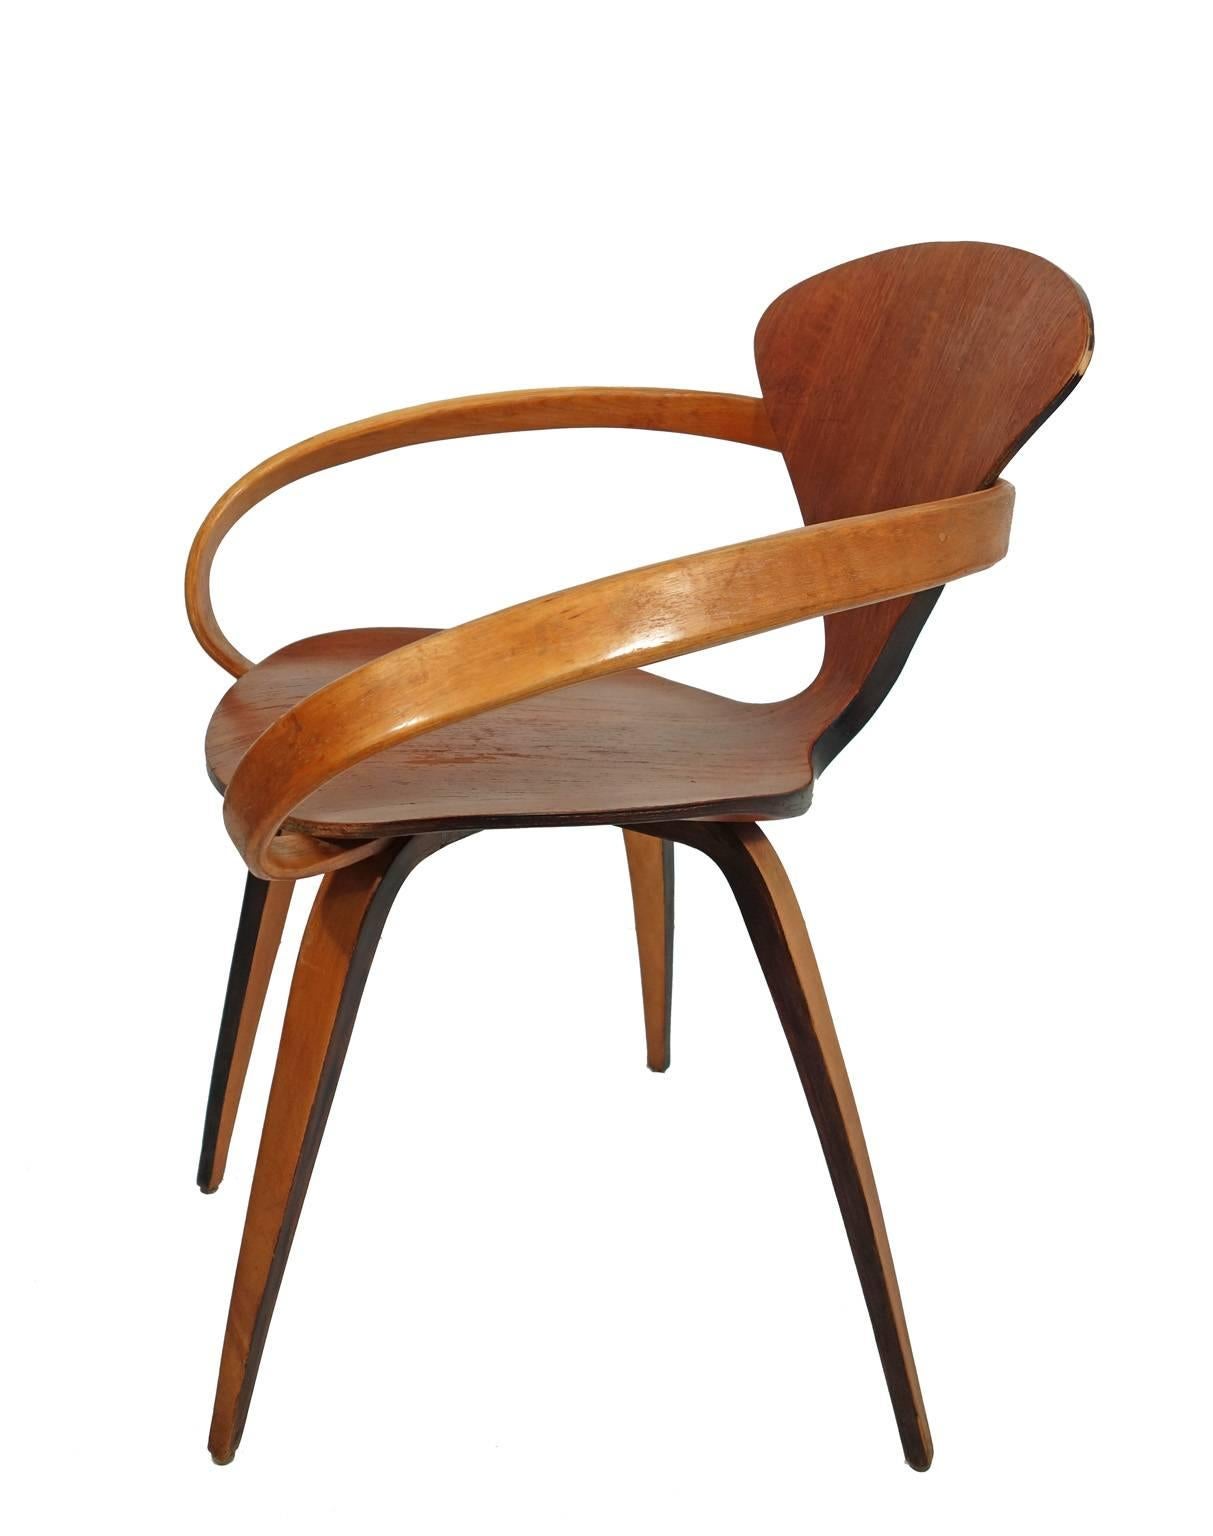 American Norman Cherner Chair for Plycraft -Teak and Beach